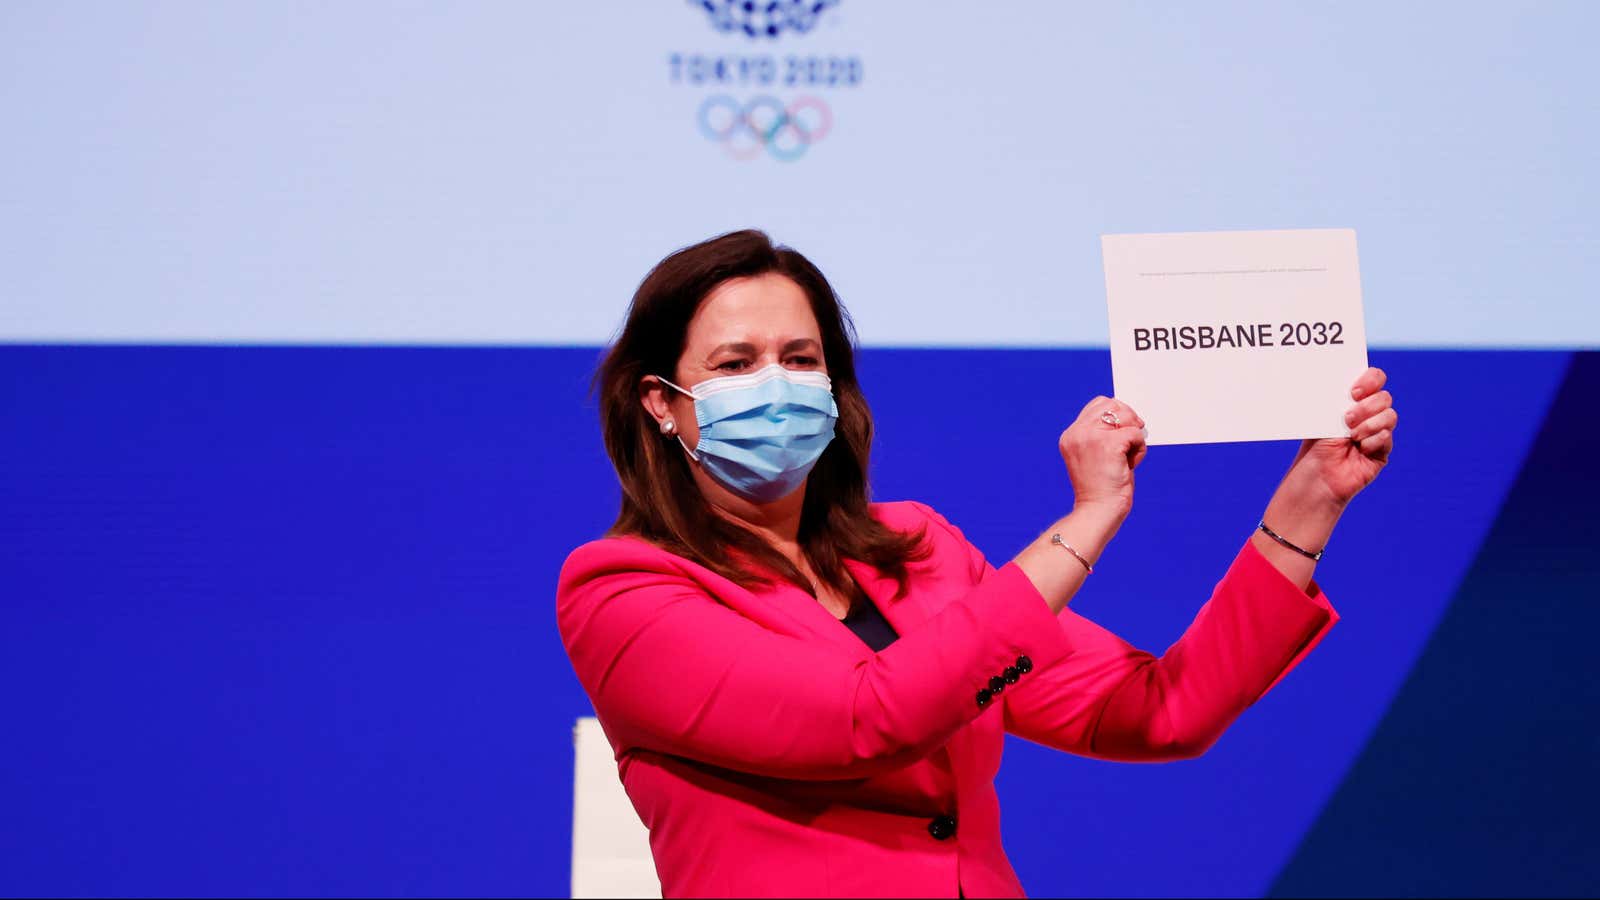 The choice of Brisbane as host city for the 2032 Olympics is symbolic in more ways than one.